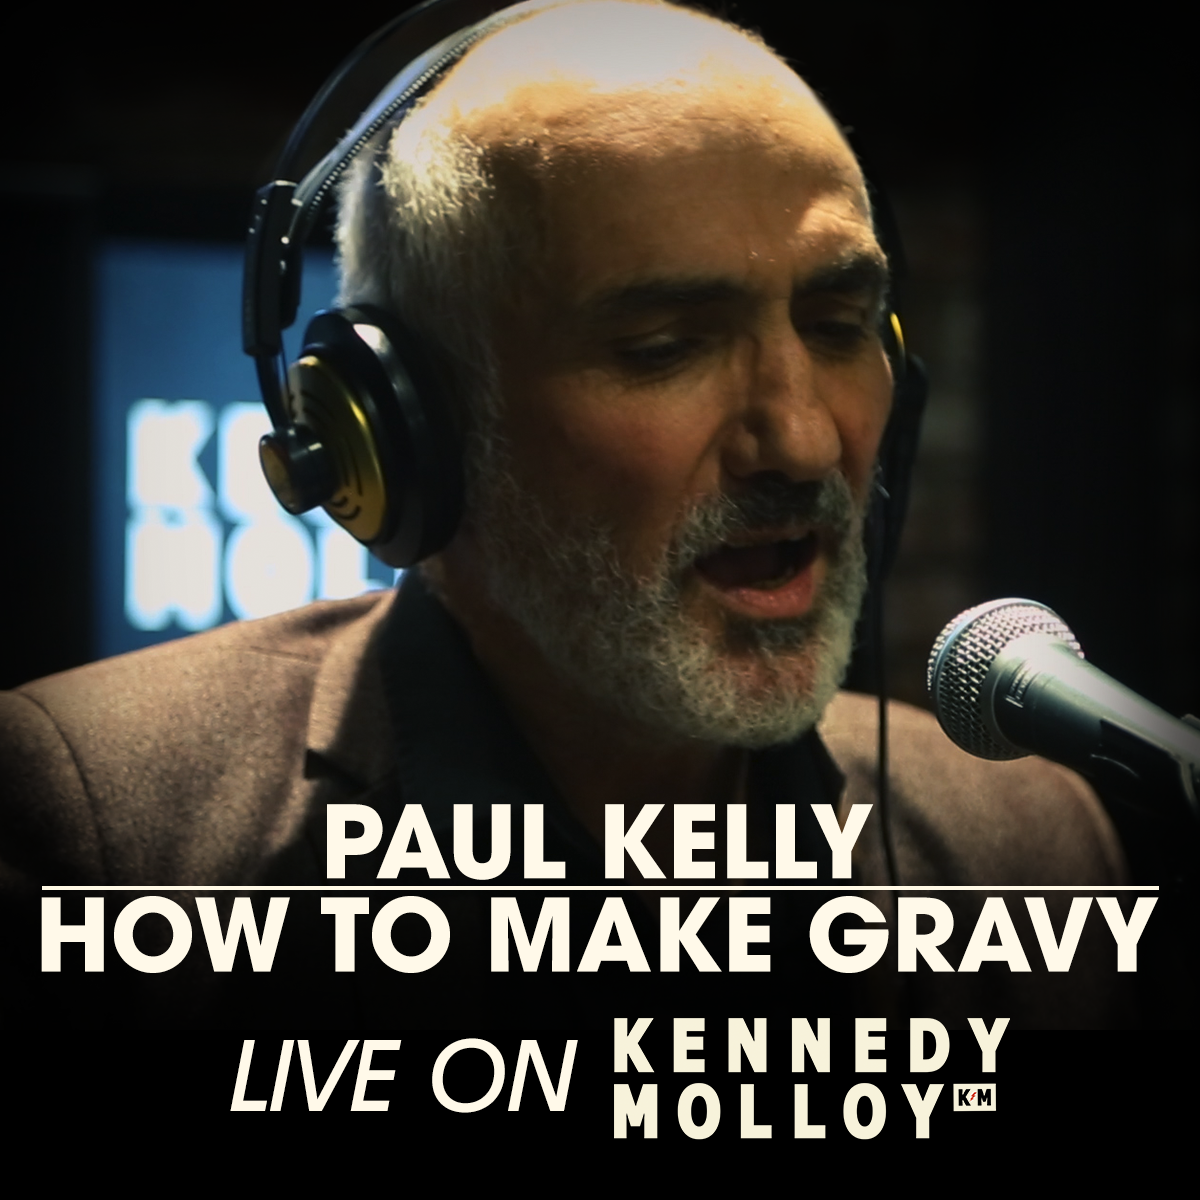 Paul Kelly - How To Make Gravy (Acoustic) (Live On Kennedy Molloy!)